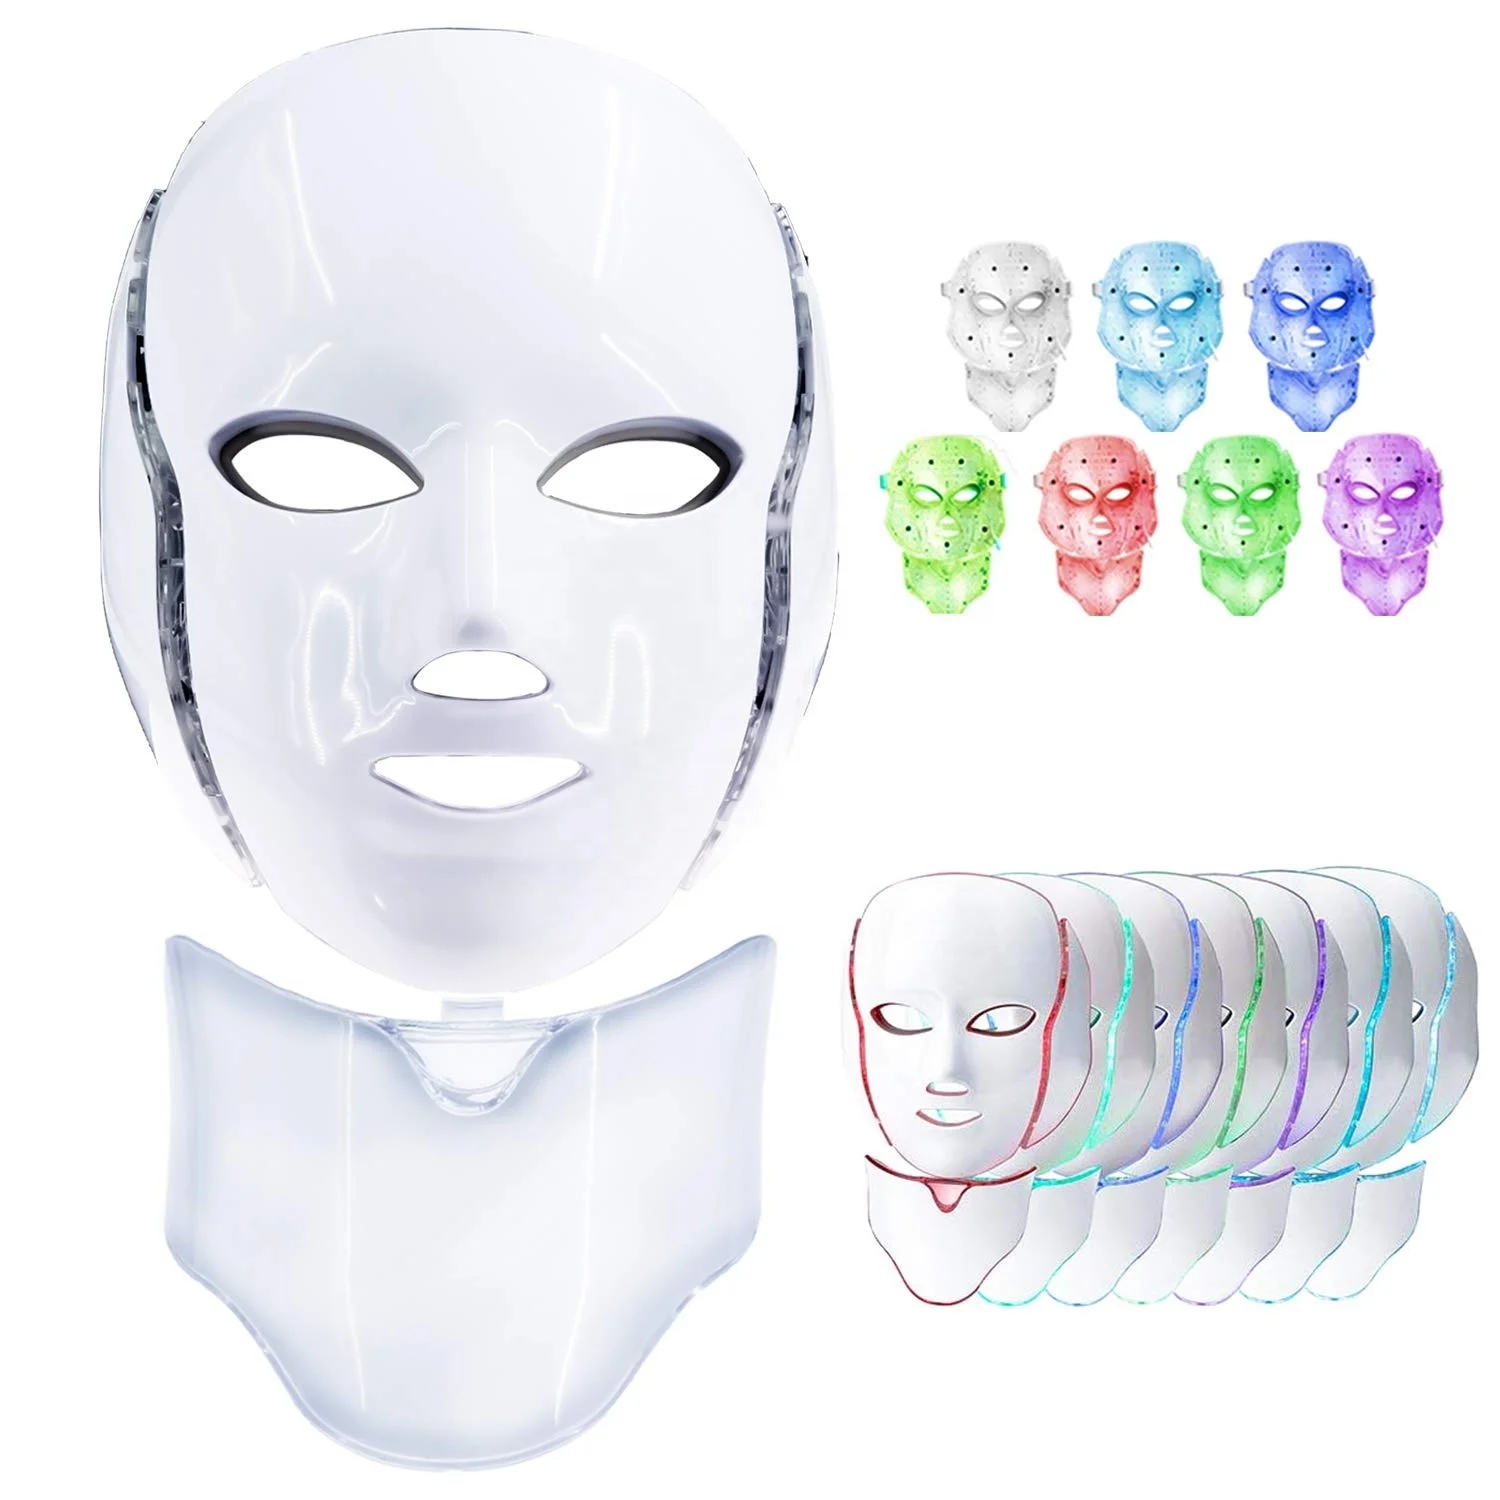 

Anti-aging 7 Color Face Neck Mask Colorful led Face Beauty masks Light Therapy Phototherapy Skin Care PDT Neck Facial Led Mask